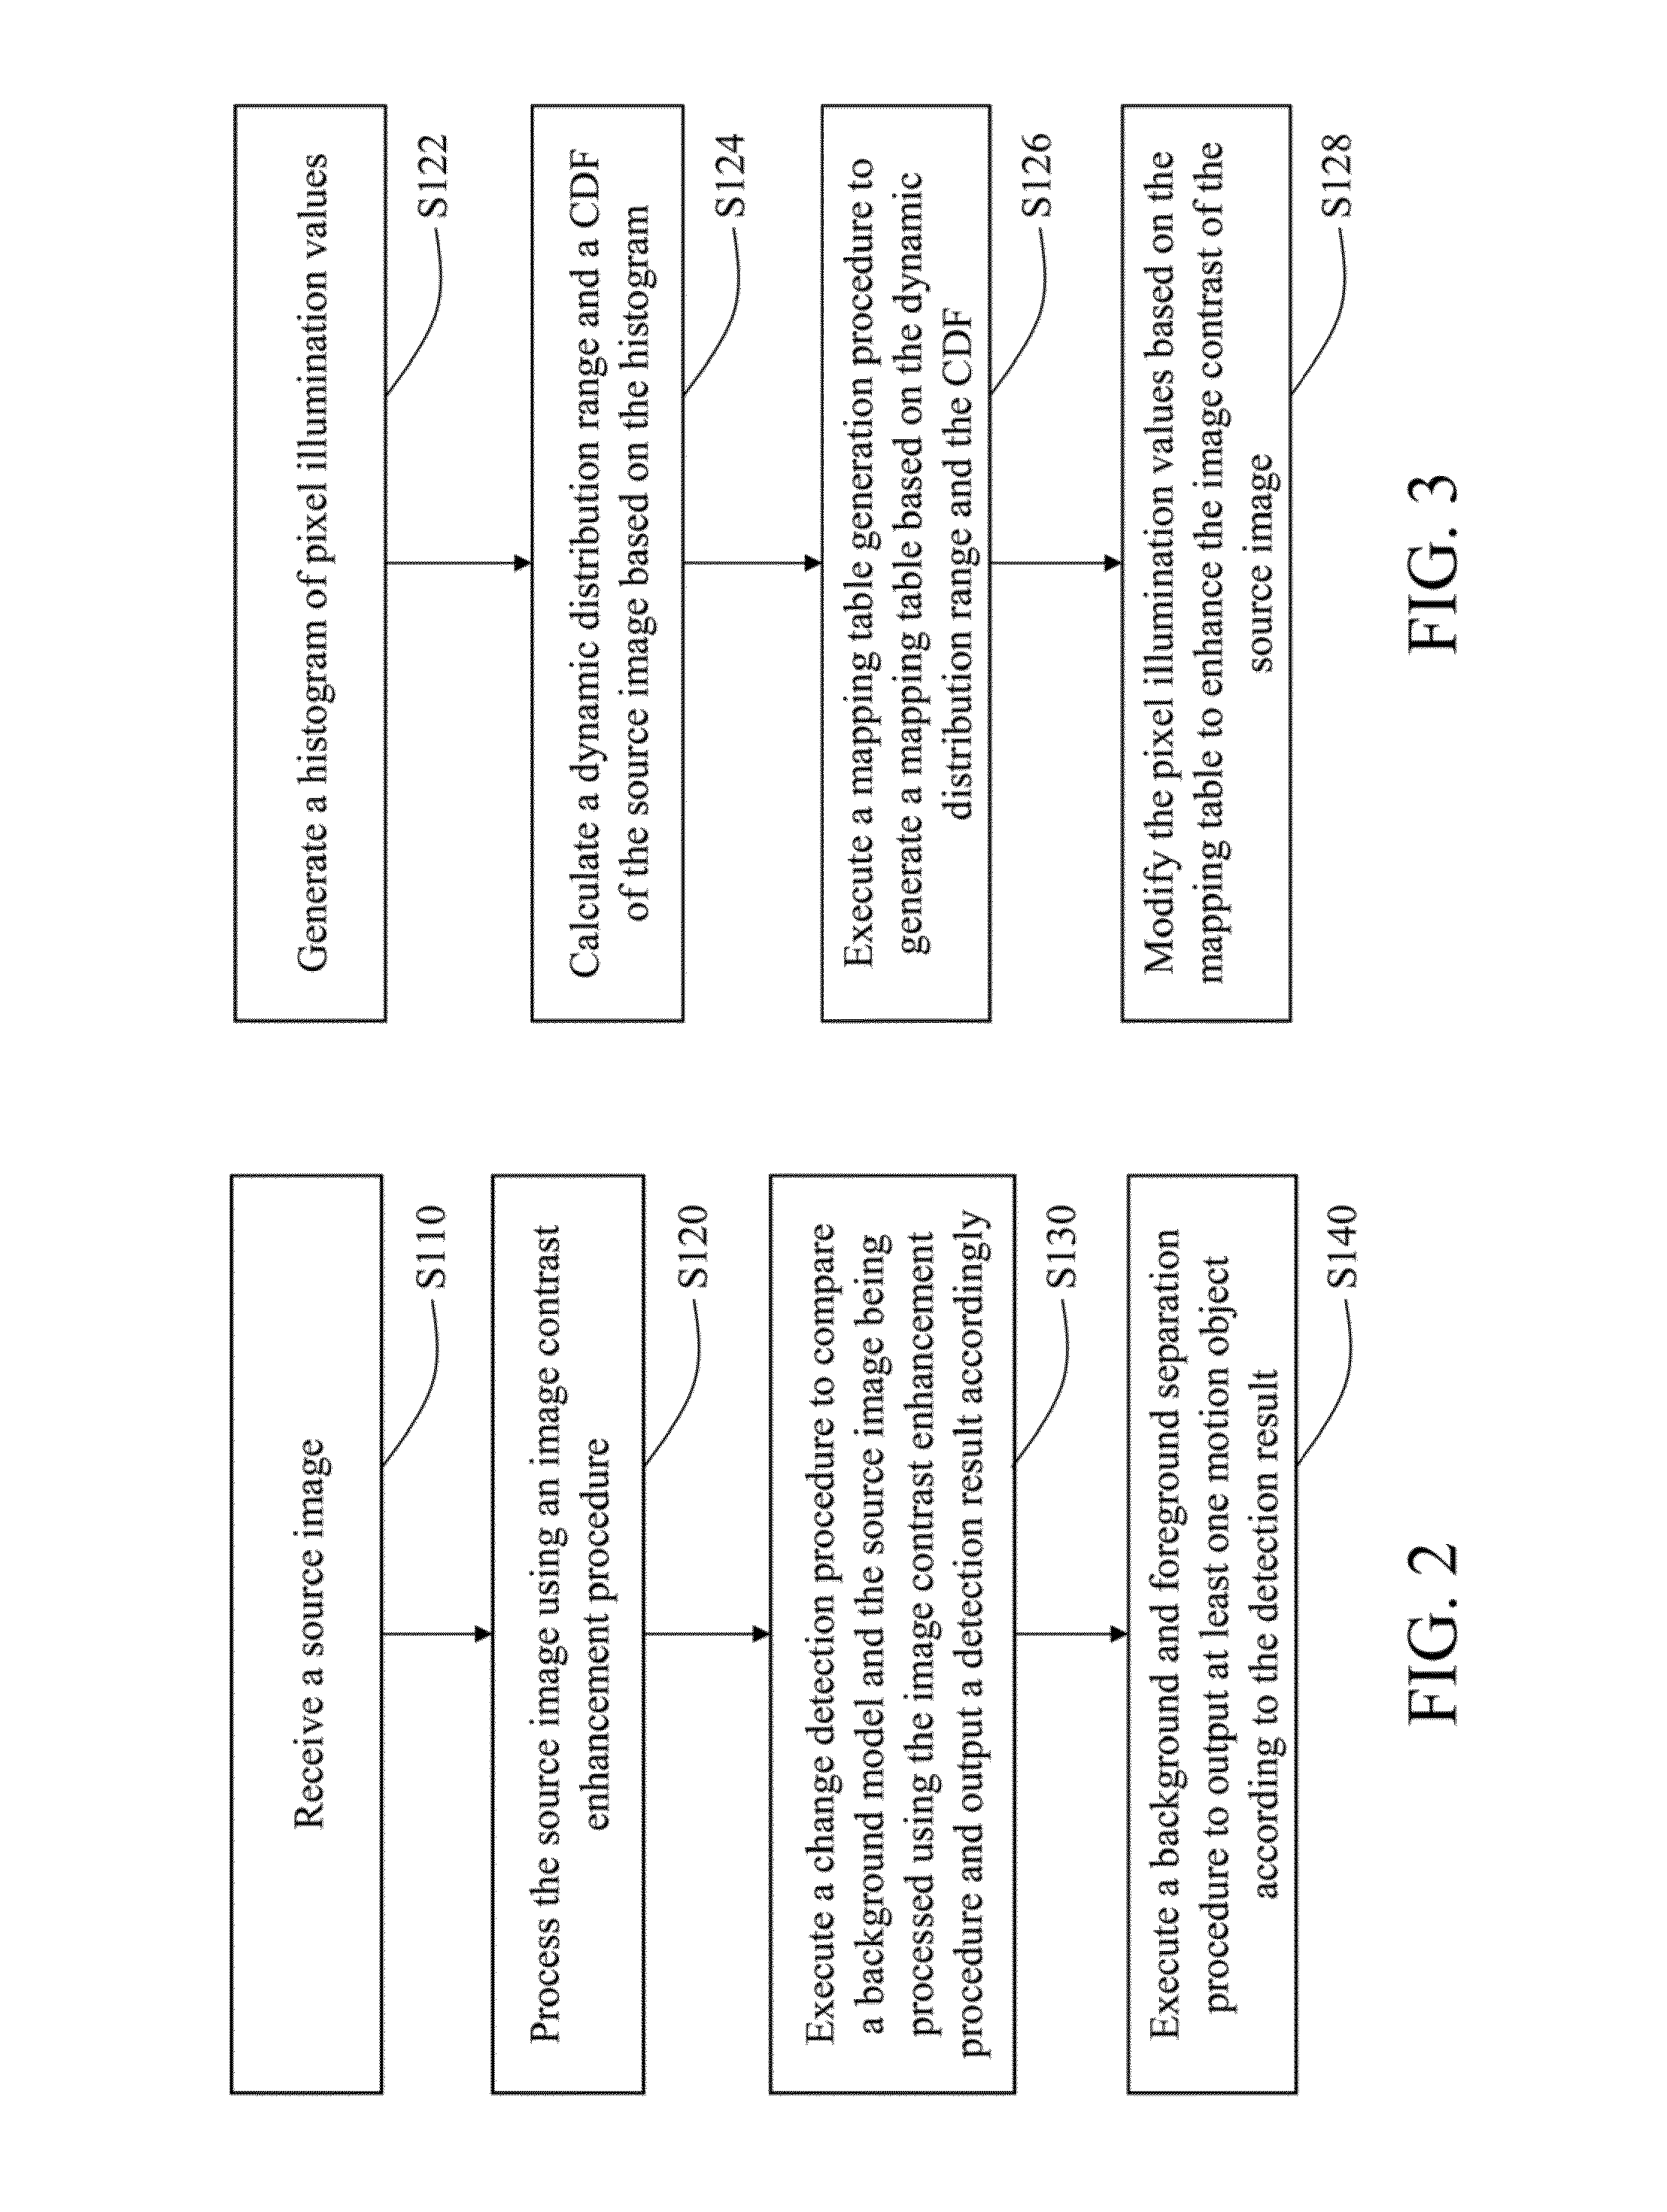 Moving object detection method using image contrast enhancement